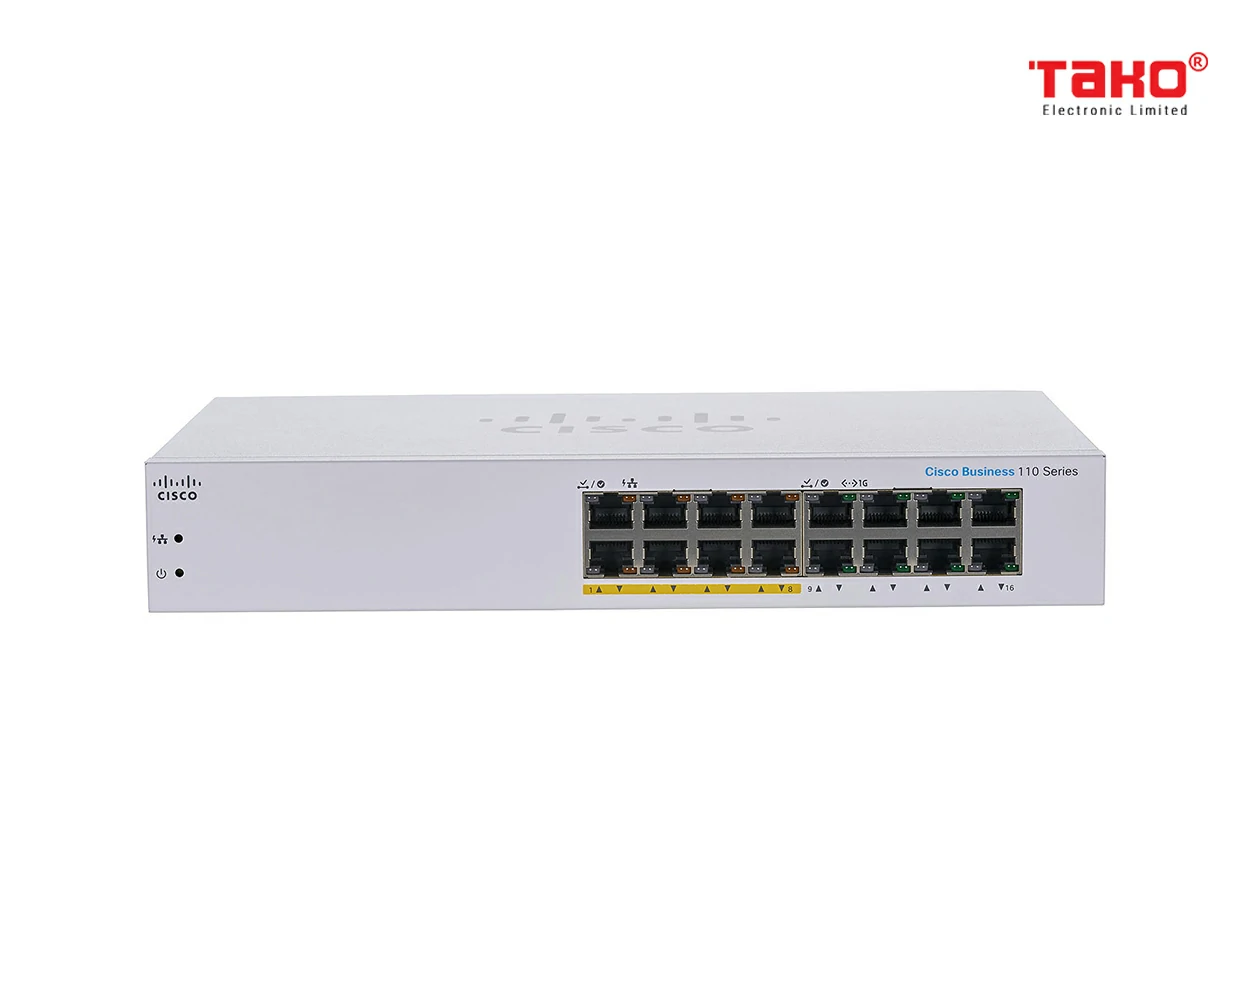 Cisco CBS110-16PP 16 port 10/100/1000 Mbps unmanageable switch, 8 of which are PoE 1